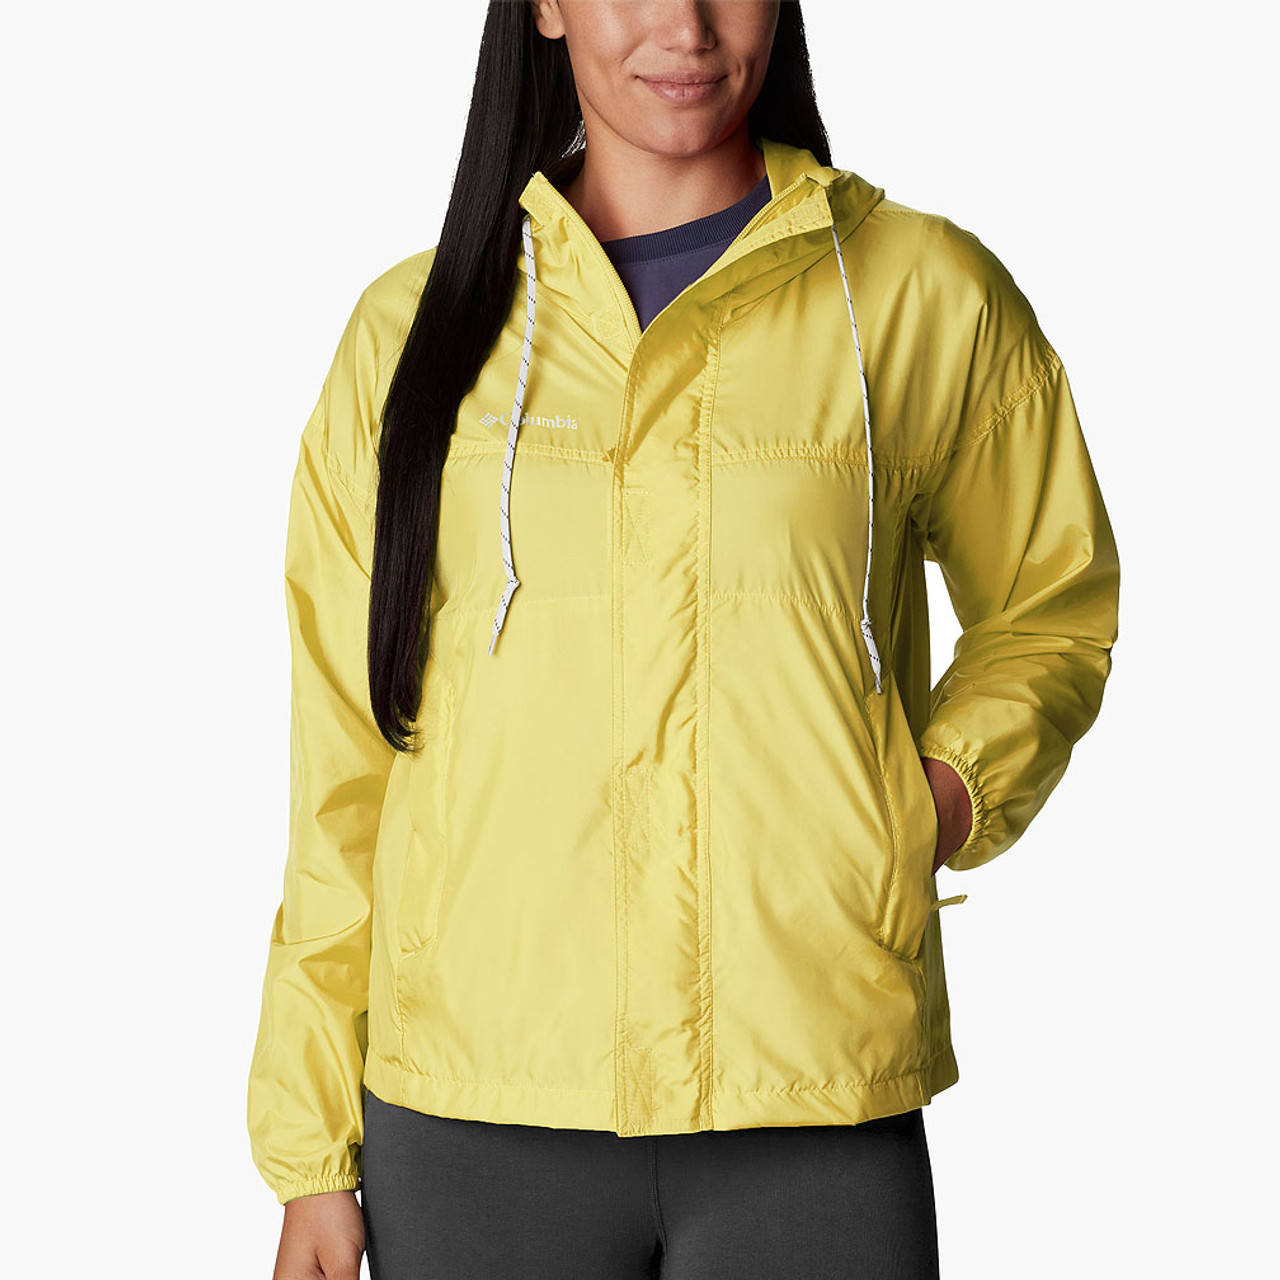 The Guide to Wind Jackets - Golf4Her.com